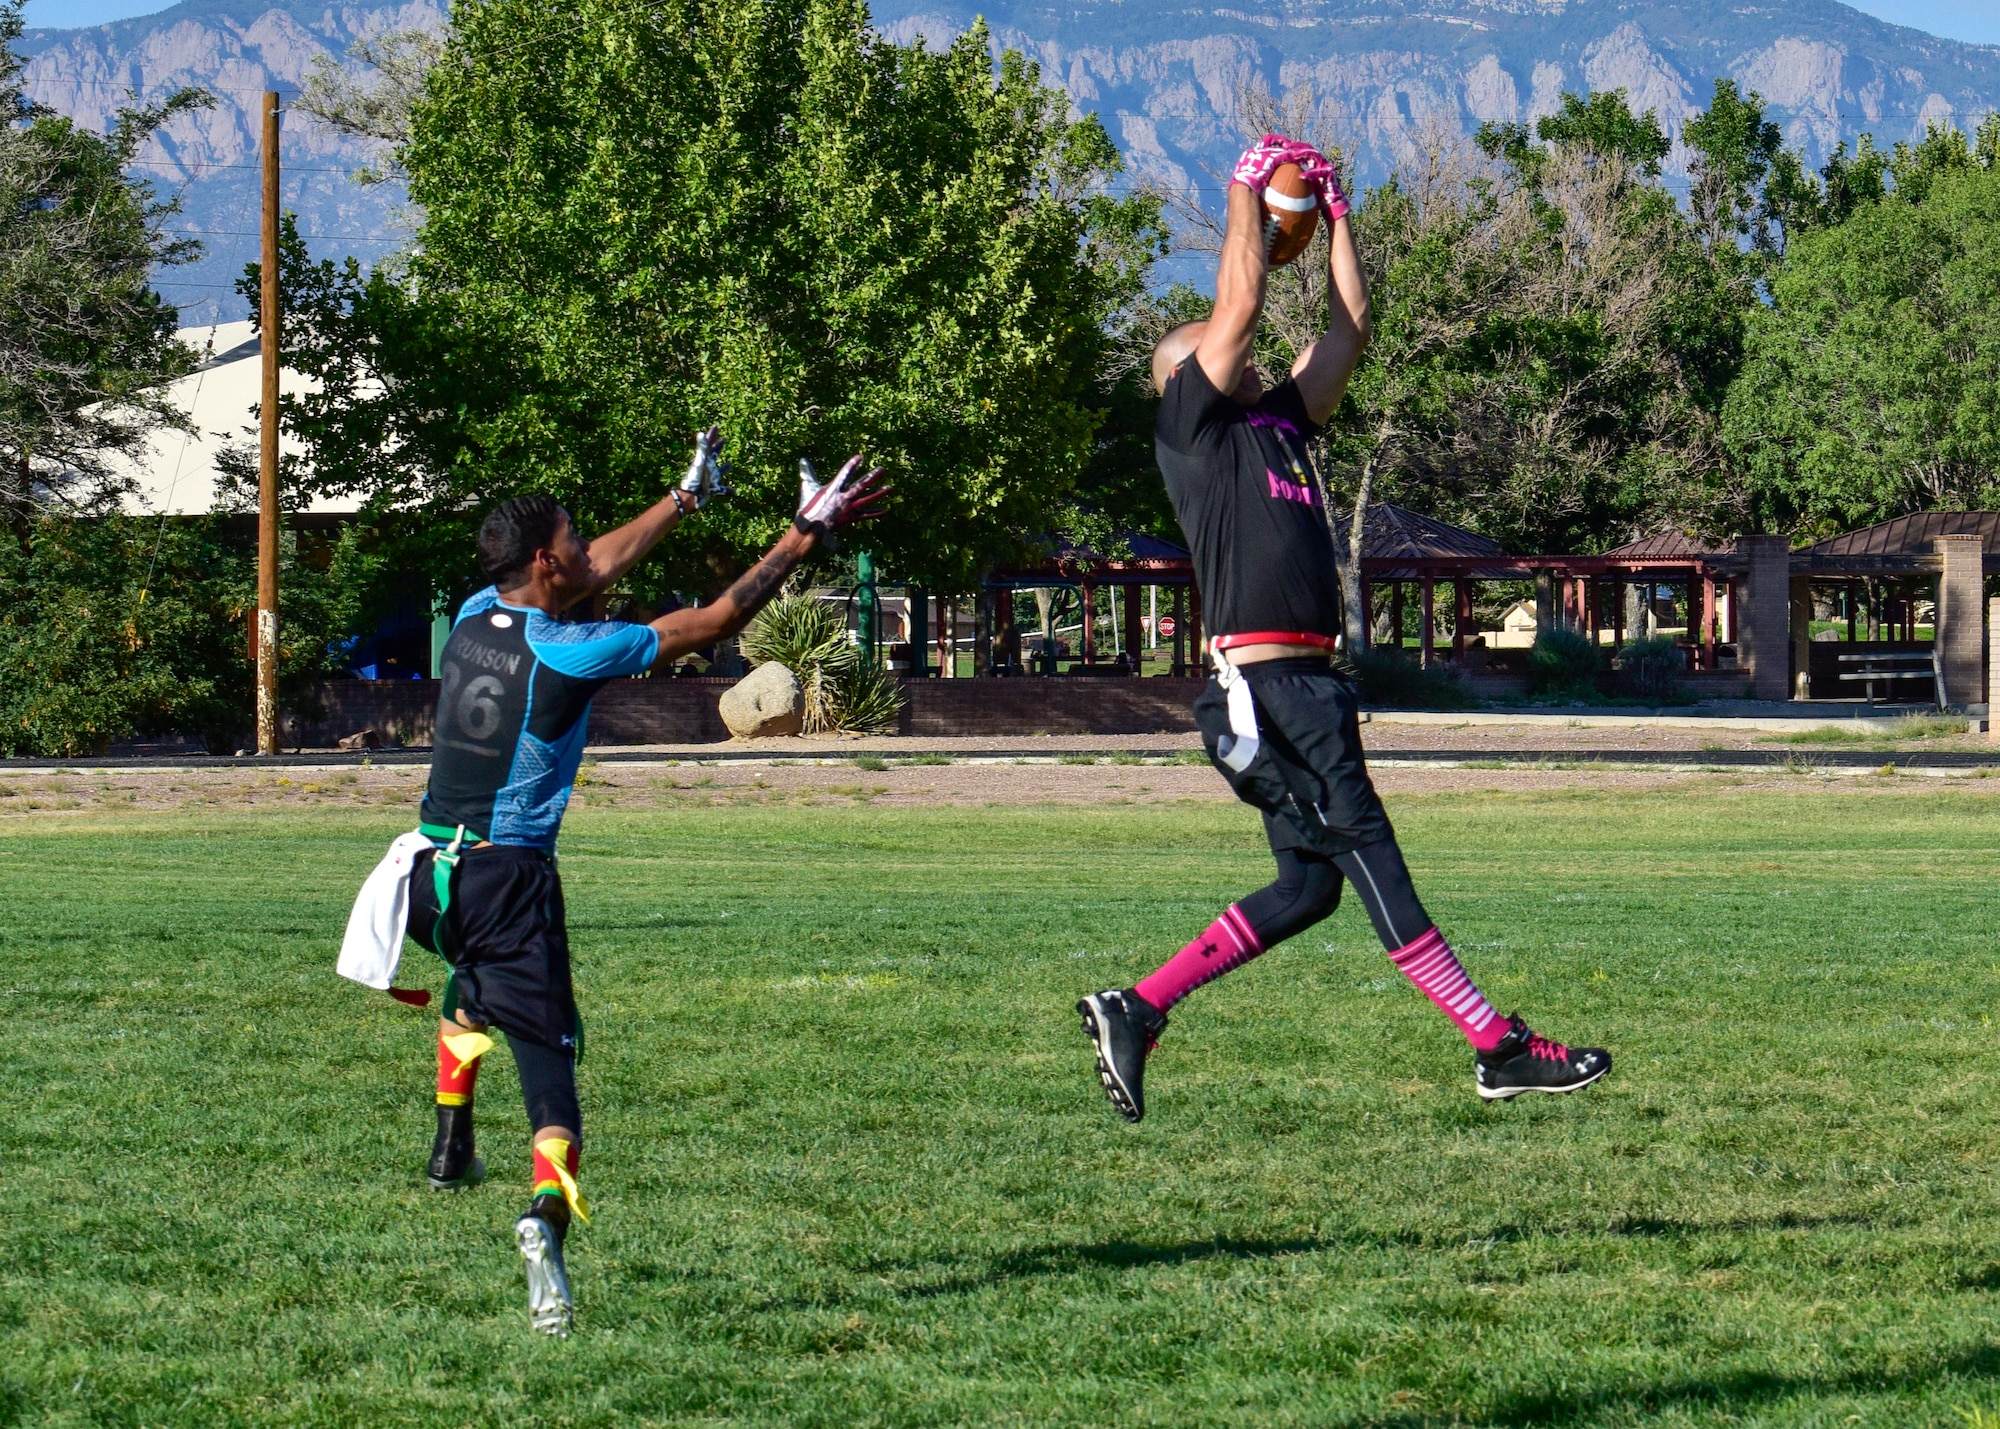 Staff Sgt. Mark Birrenkott, safety for the 58th AMXS flag football team, intercepts a pass intended for Airman 1st Class Patrick Brunson, wide receiver for the WSSS-Joseph football team at Kirtland Air Force Base, N.M., Sept. 17, 2018. Each team participating in the 2018 KAFB Intramural Flag Football season will play 18 games during the regular season. (U.S. Air Force photo by Airman Austin J. Prisbrey)